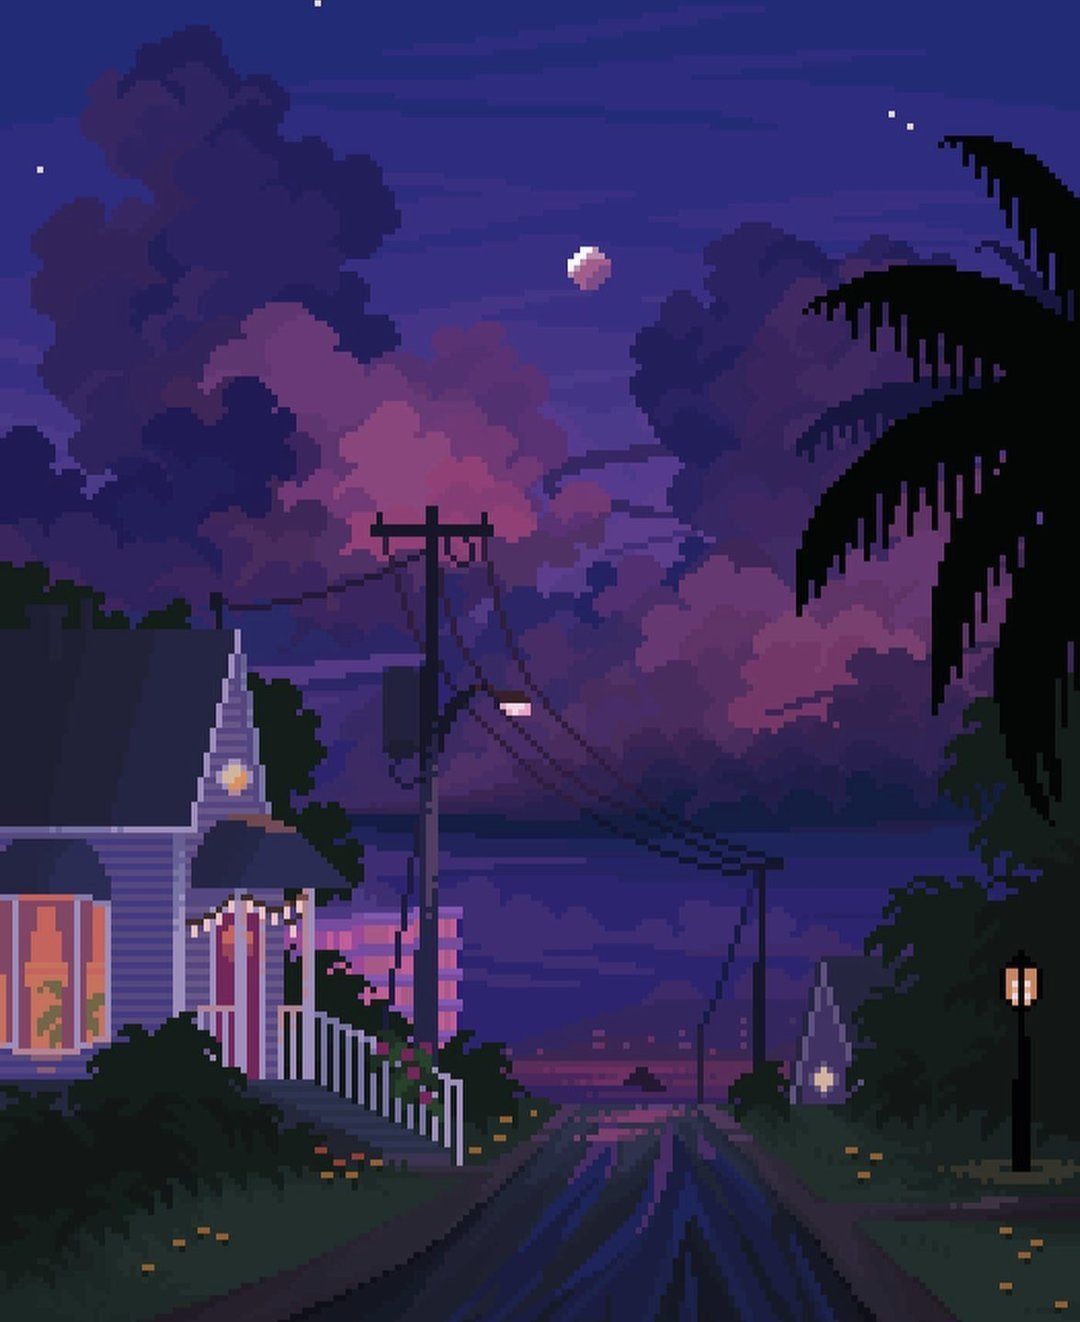 Pixel art of a house by the water with a purple sky - Pixel art